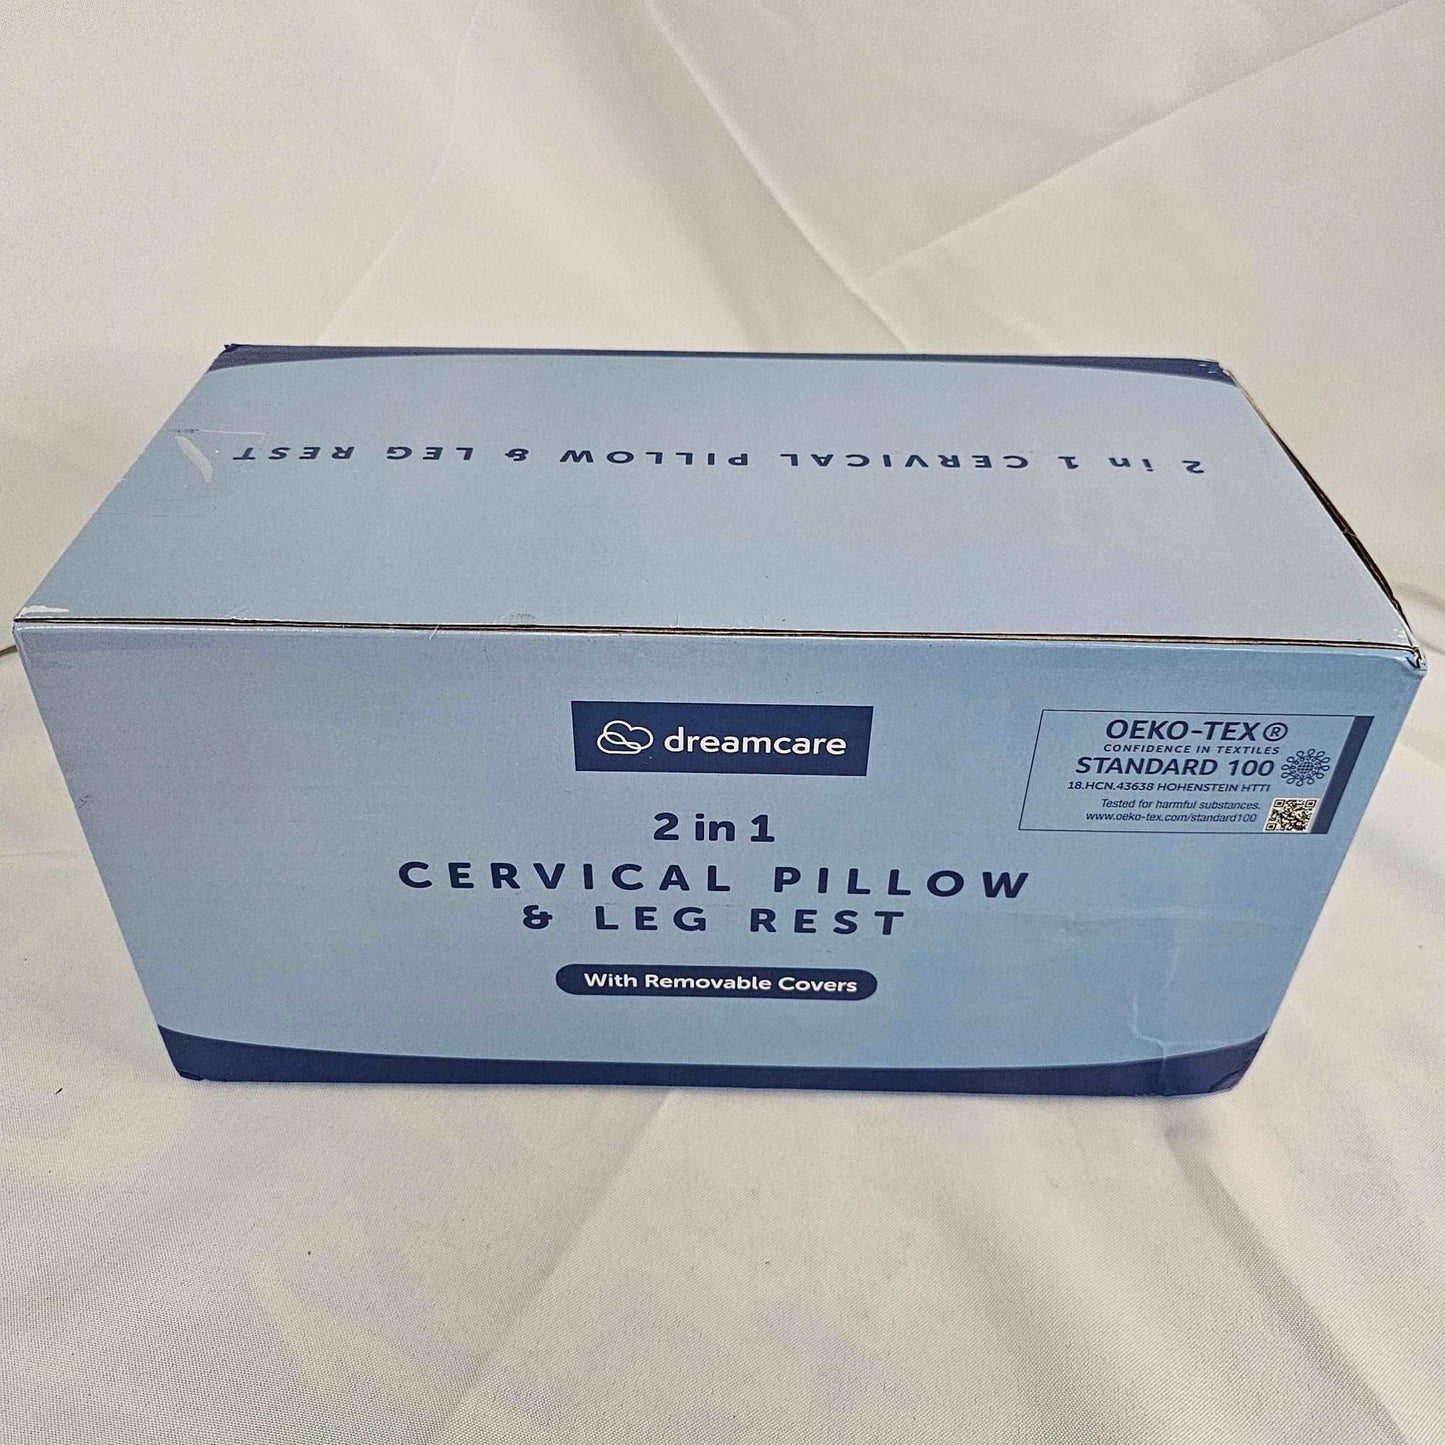 Cervical Pillow Leg Rest 2 in 1 With Removable Covers Dreamcare - DQ Distribution